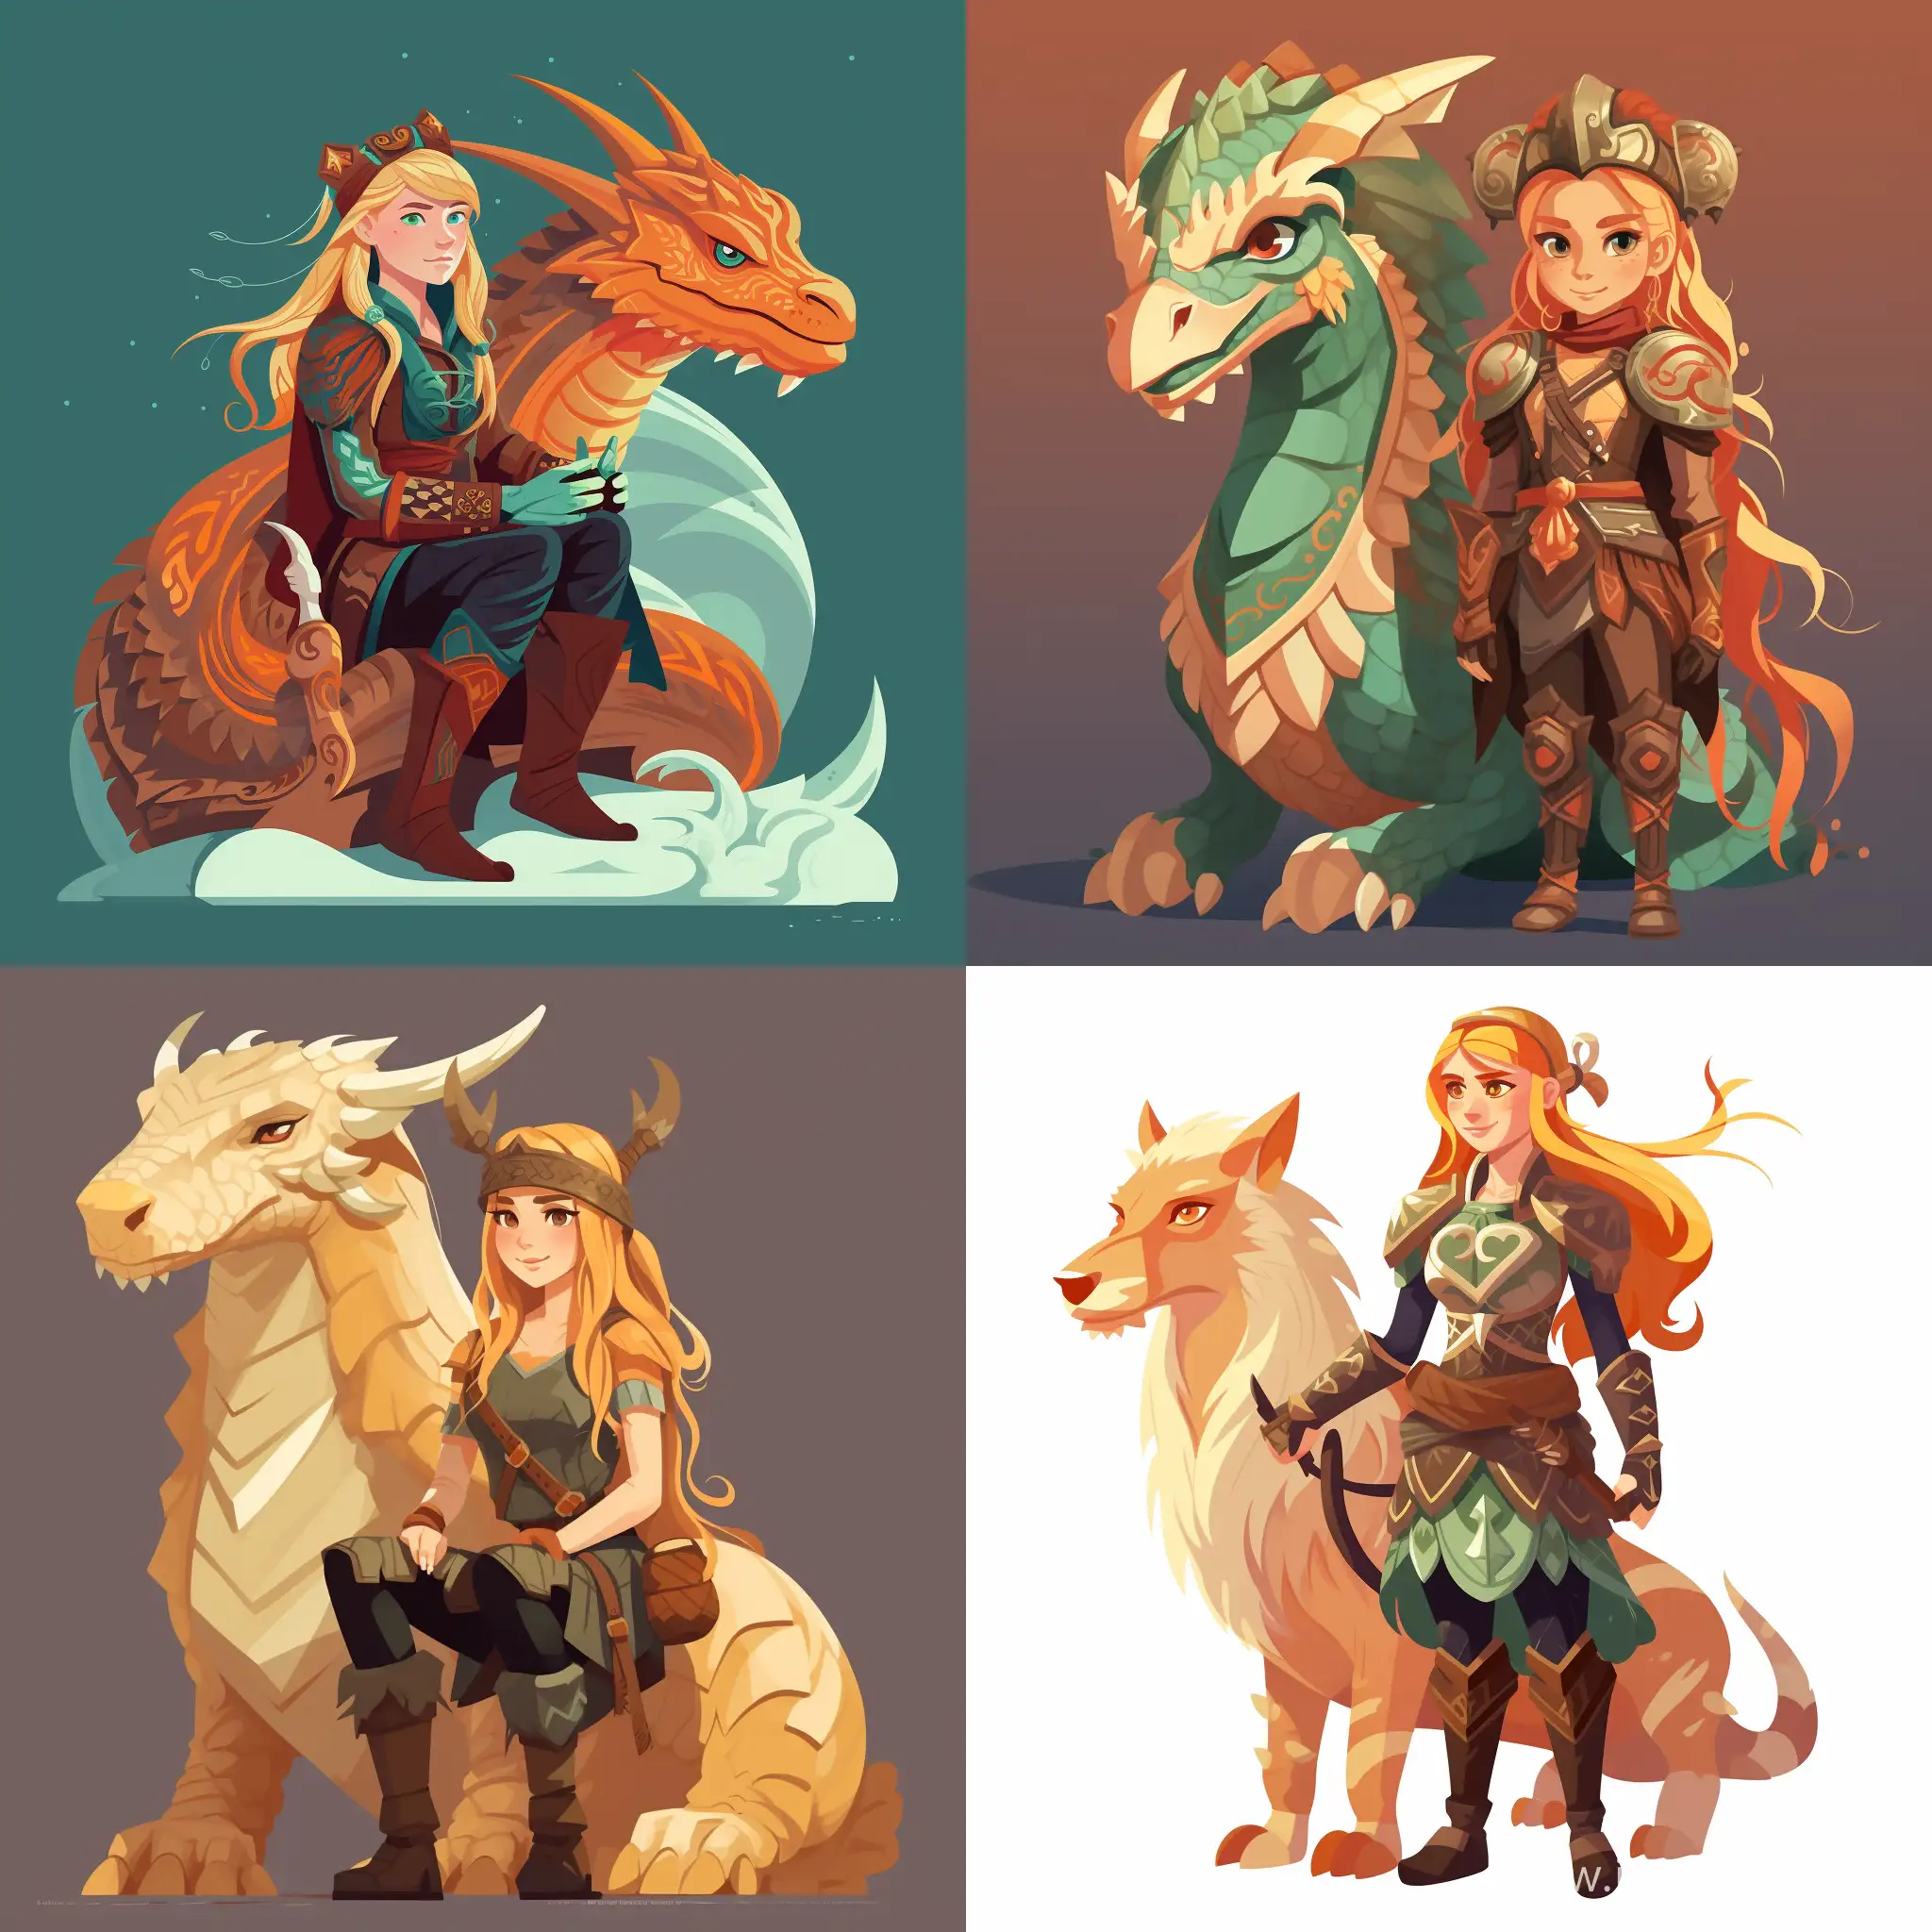 Young-Viking-Warrior-and-Dragon-Companion-in-Flat-Style